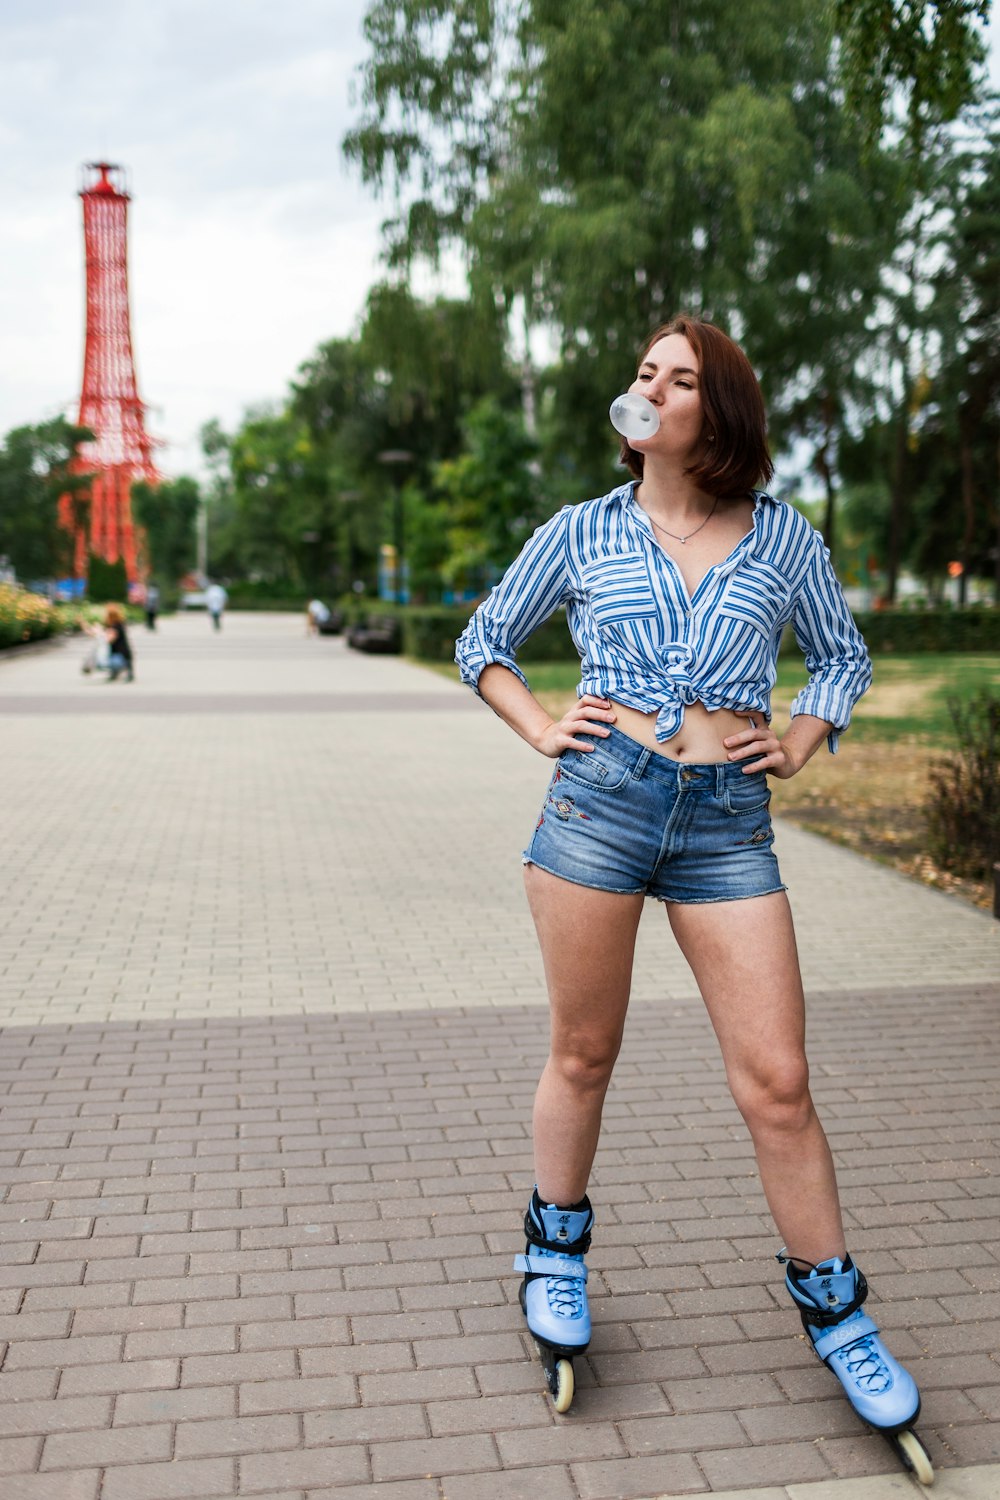 woman in blue and white stripe shirt and blue denim shorts standing on sidewalk during daytime